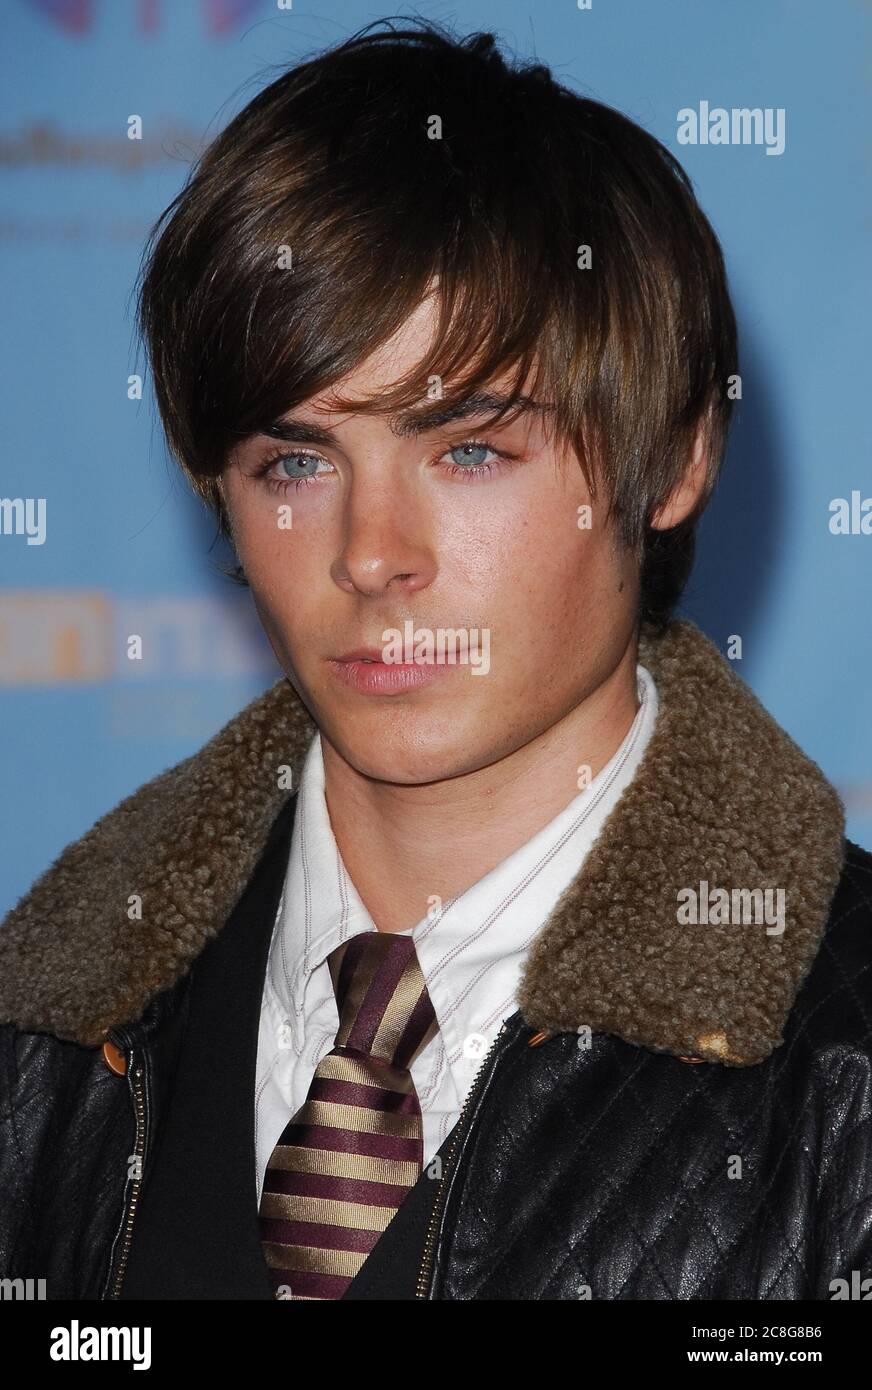 Zac Efron at the High School Musical 2: Extended Edition DVD Release Premiere held at the El Capitan Theatre in Hollywood, CA. The event took place on Monday, November 19, 2007. Photo by: SBM / PictureLux - File Reference # 34006-11928SBMPLX Stock Photo